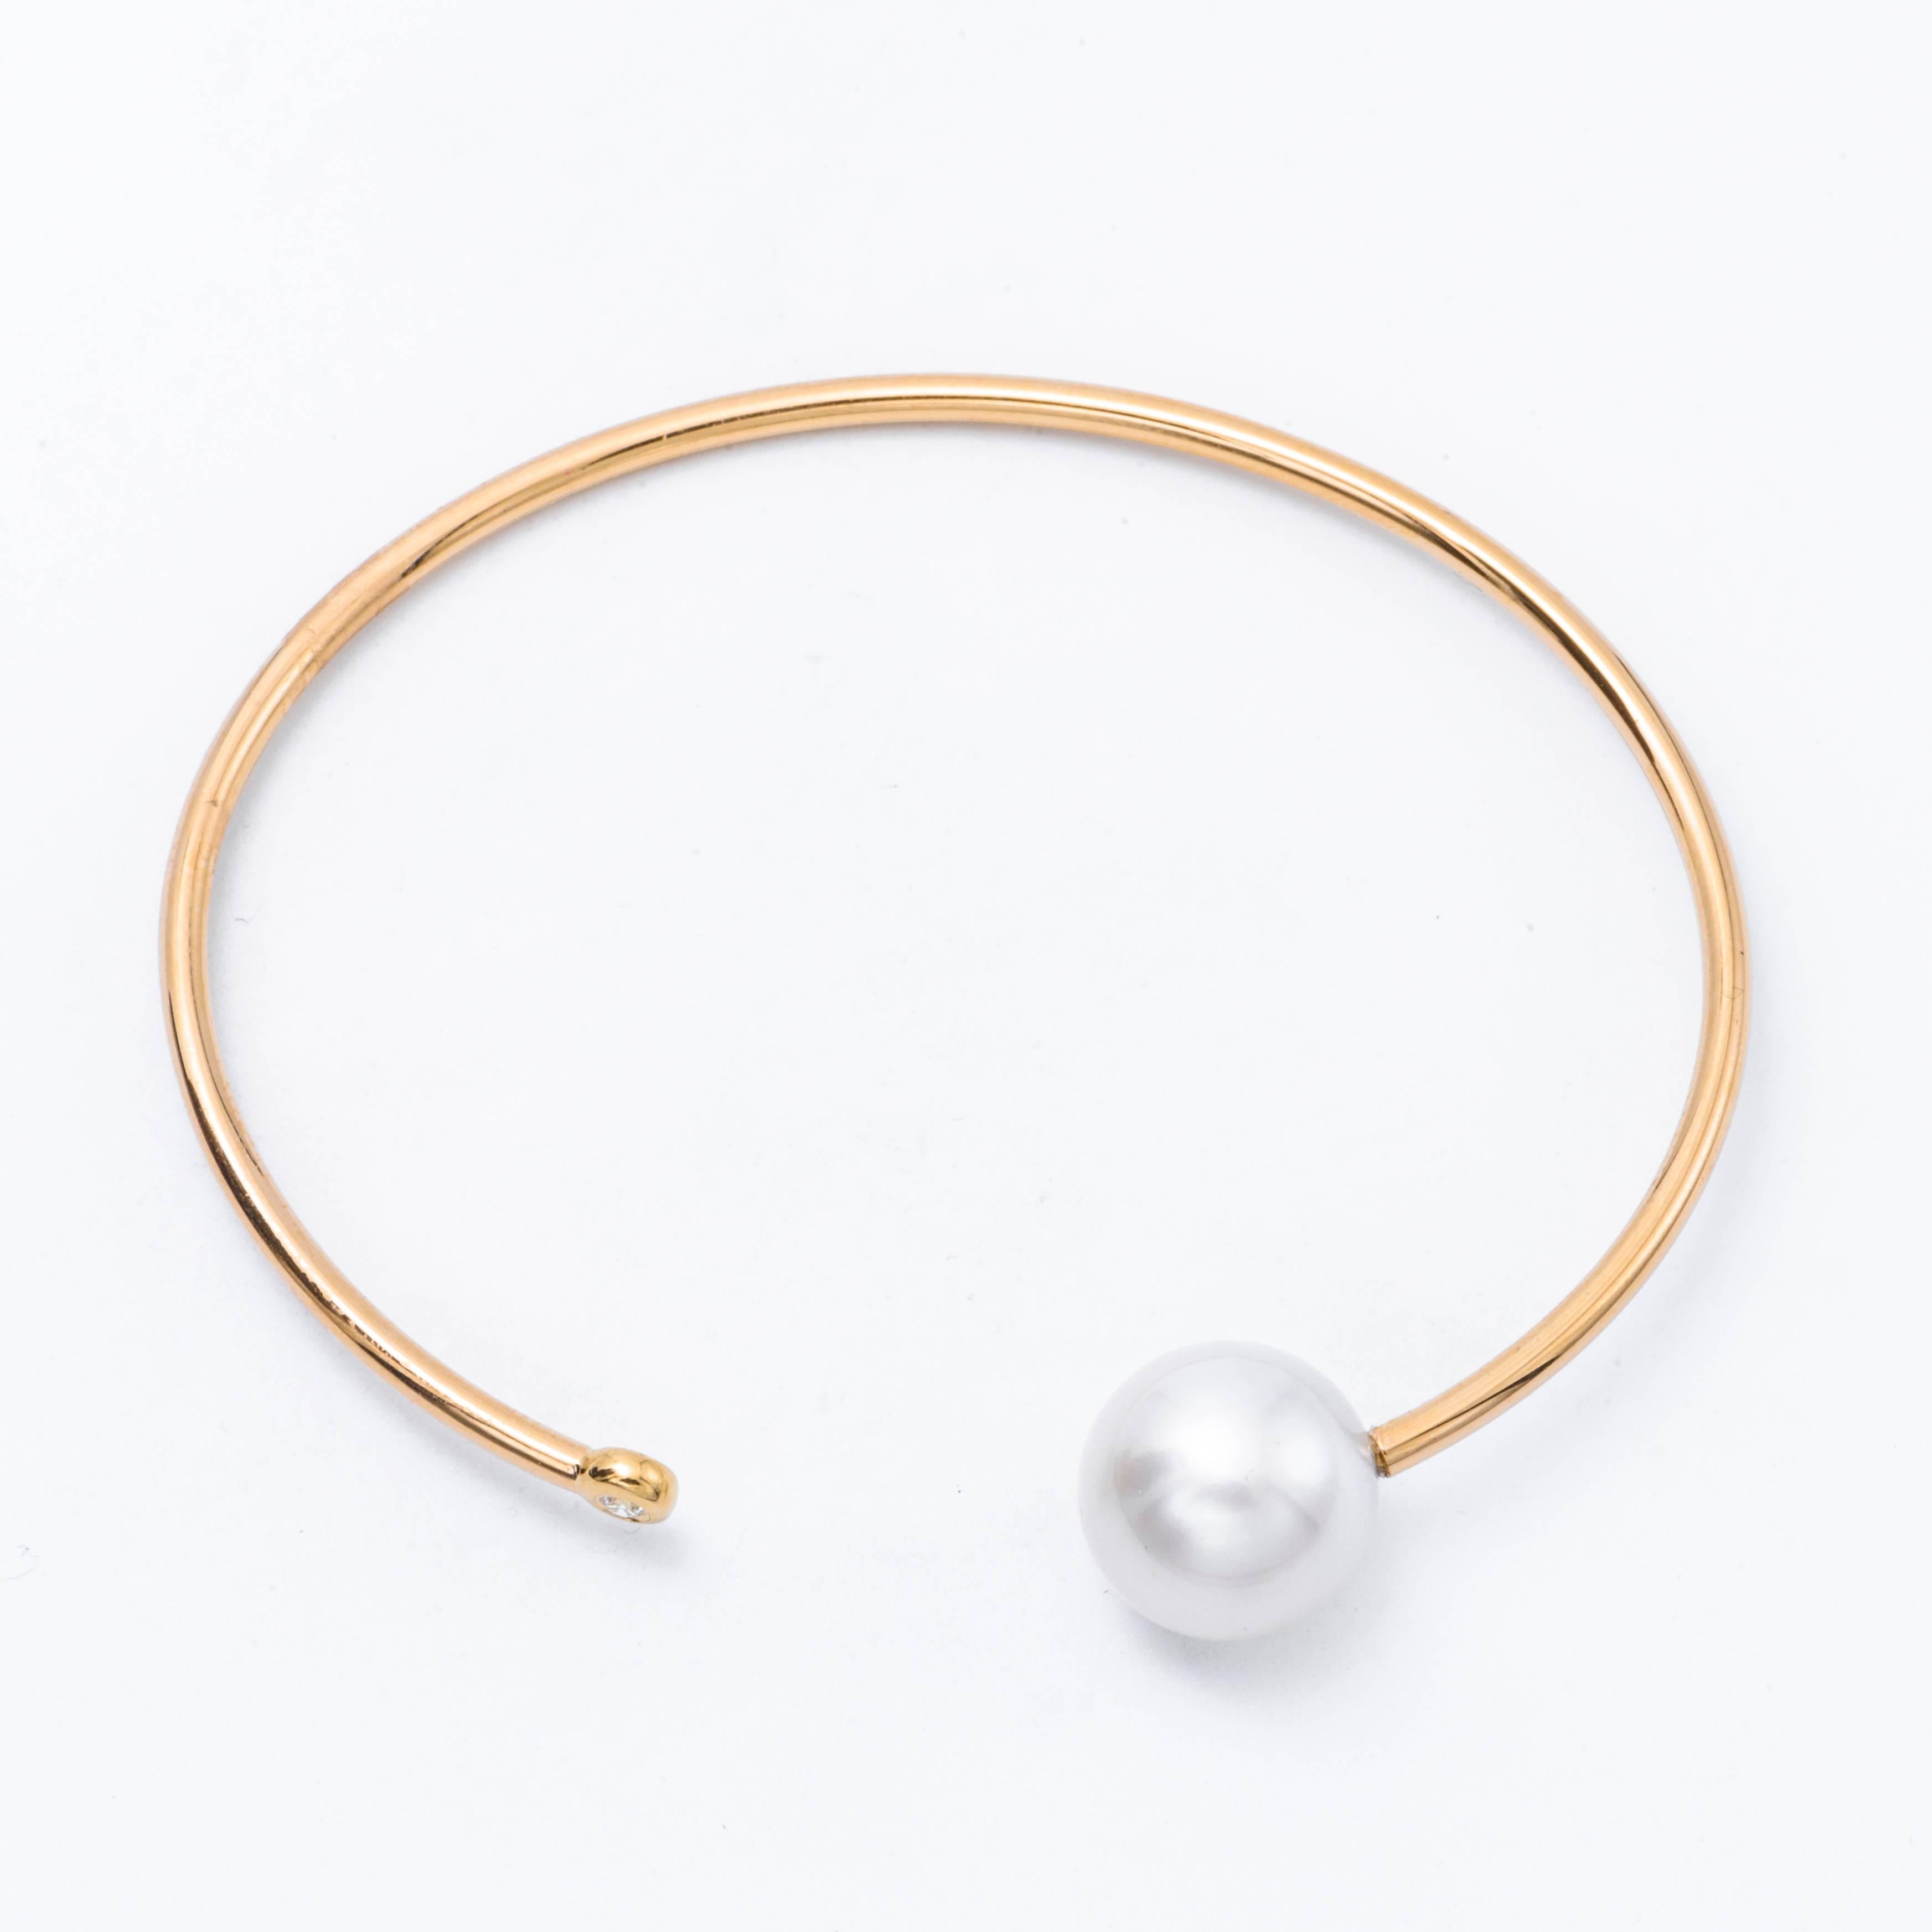 18K Yellow gold open bracelet featuring one South Sea Pearl measuring 11-12 mm and one diamond weighing 0.06 Carats.
Color G-H
Clarity SI

Pearls can be changed to Pink, Tahitian or Golden upon request. Price subject to change.